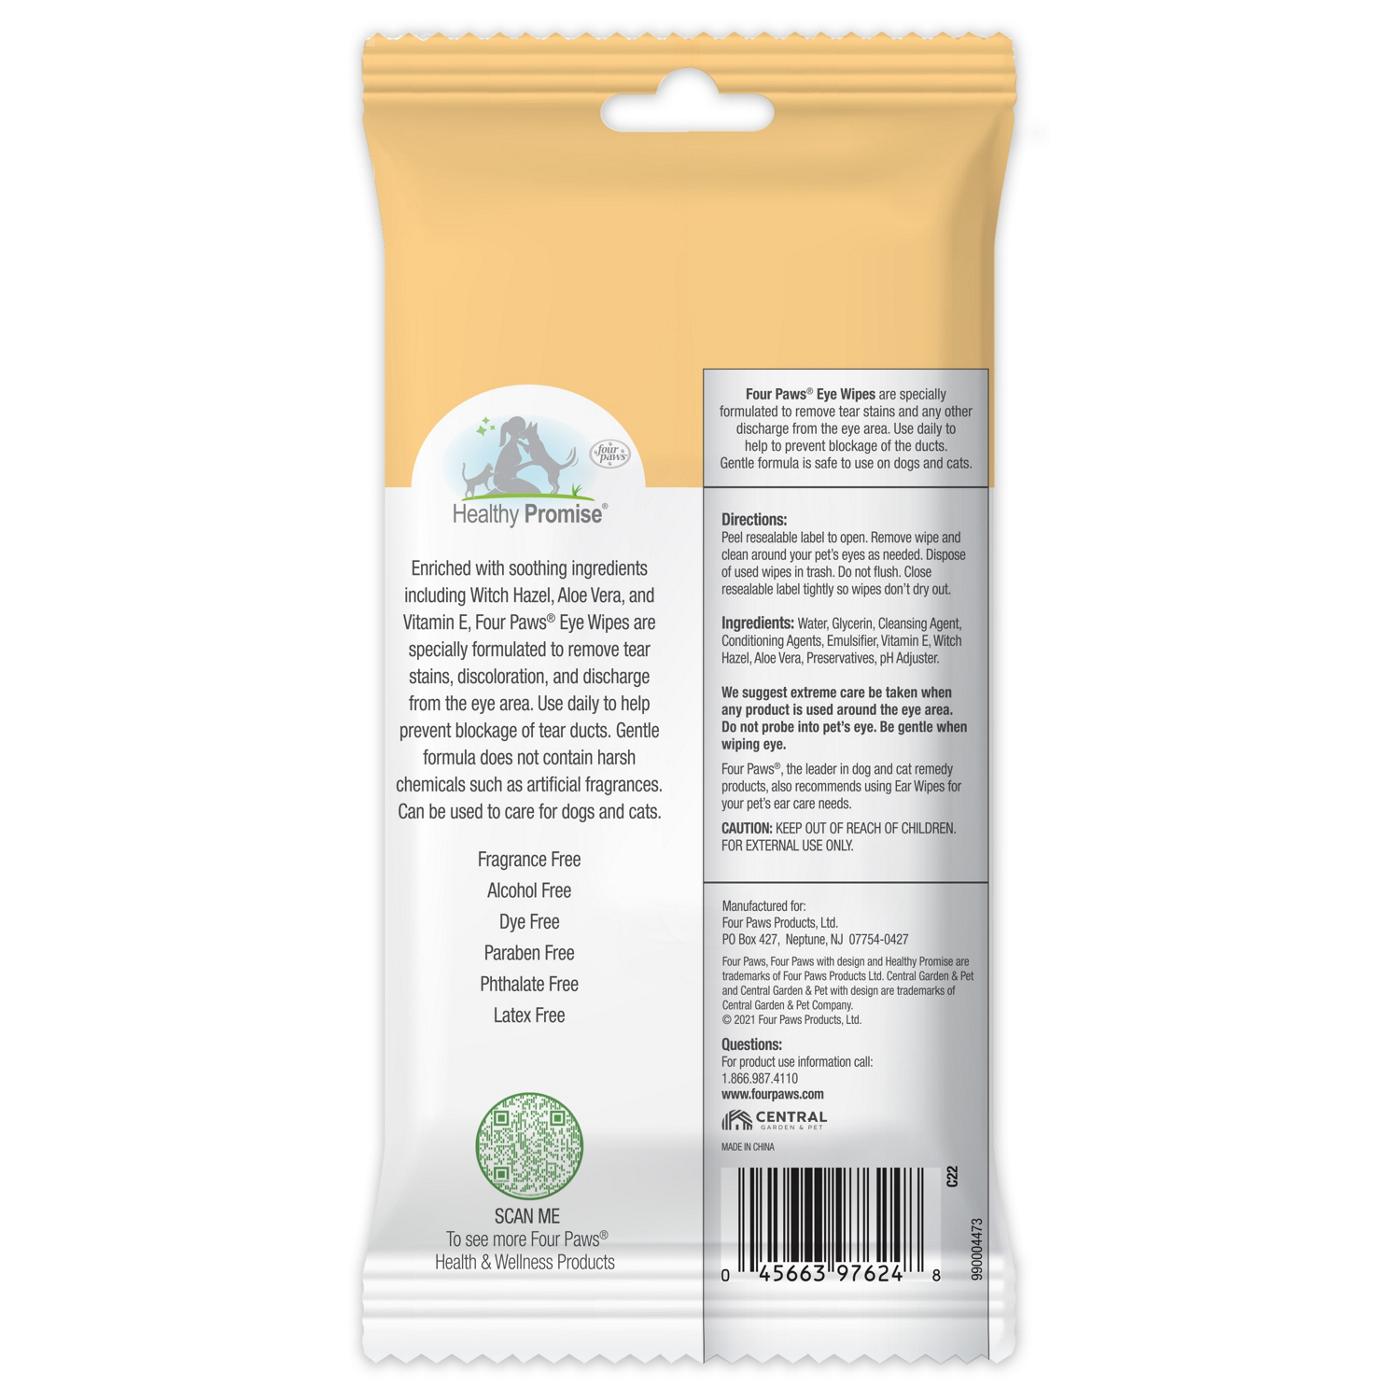 Healthy Promise Eye Wipes For Dogs & Cats; image 7 of 8